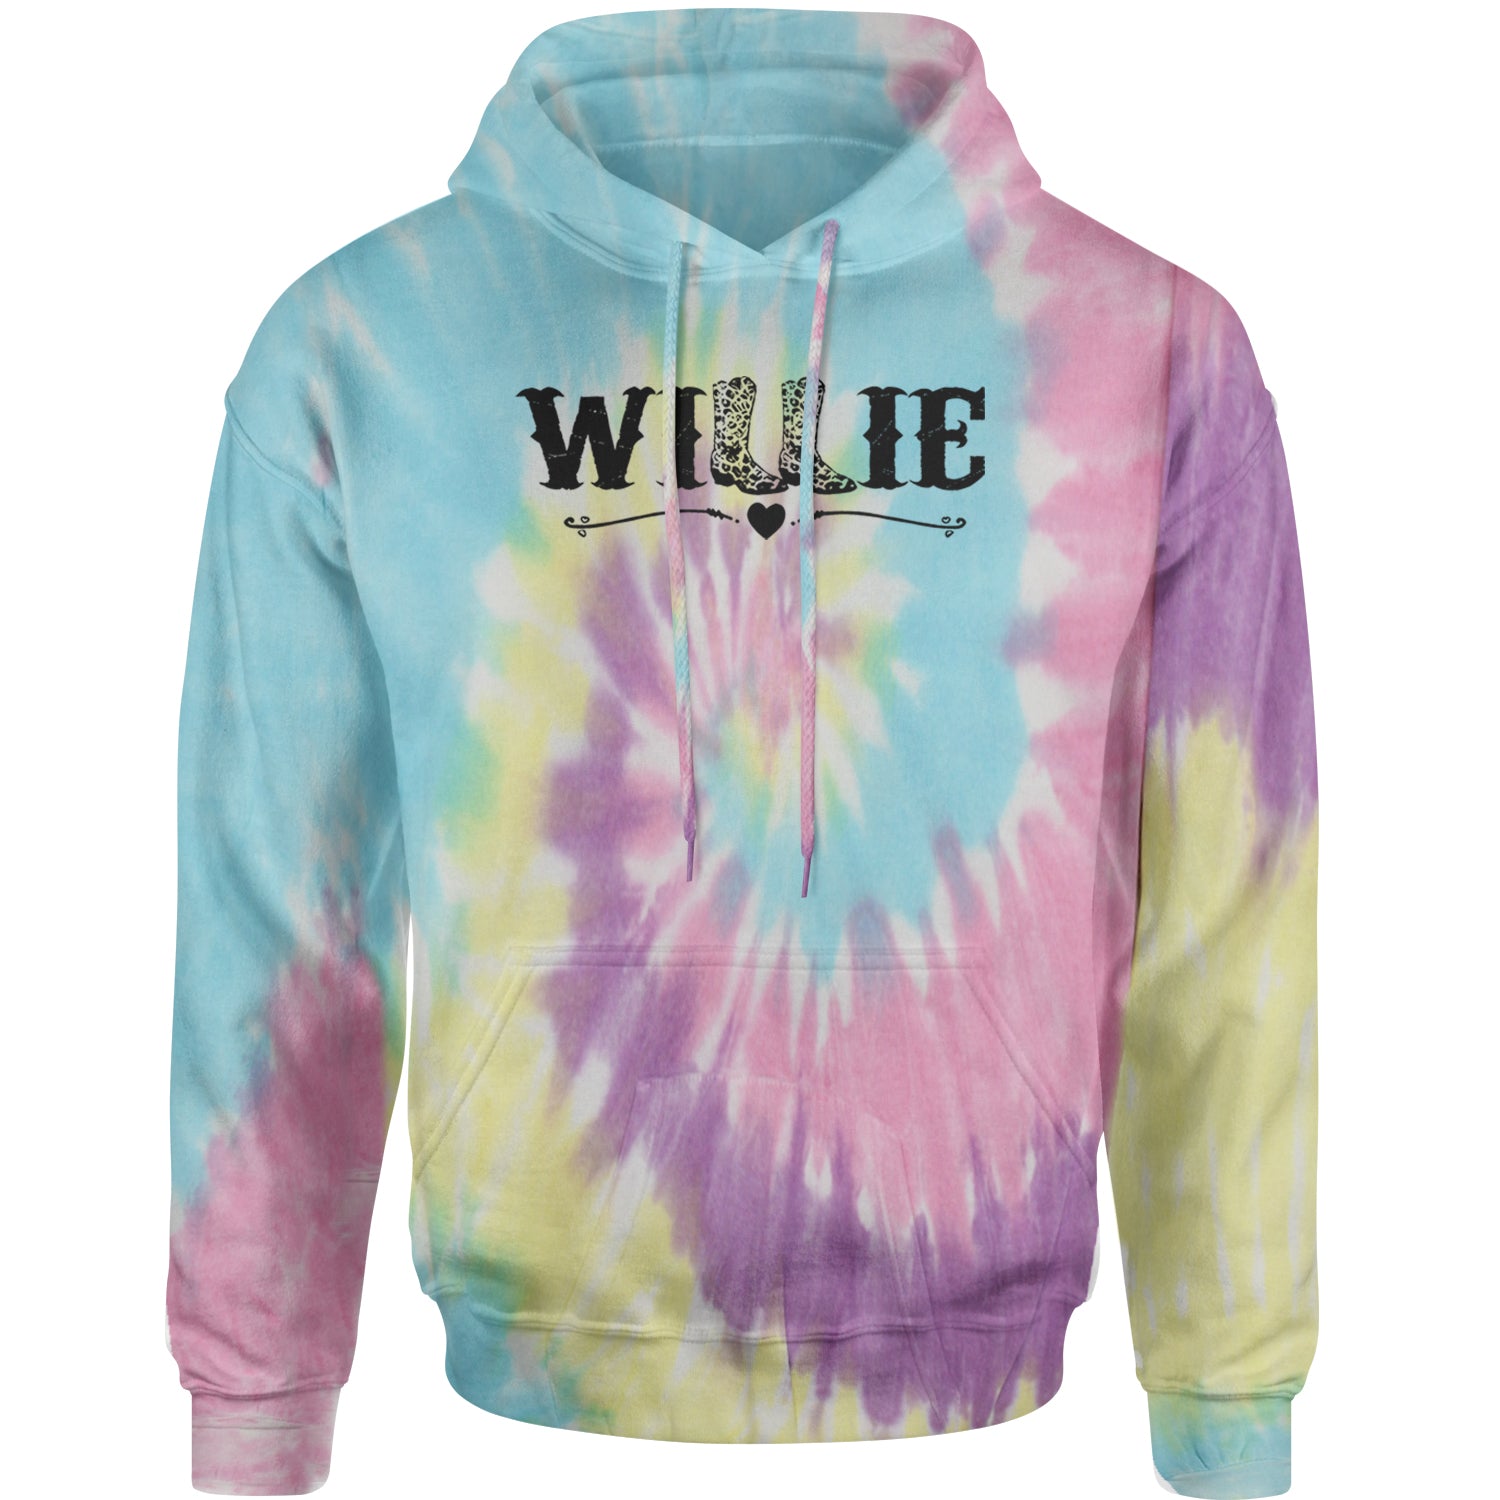 Willie Cowboy Boots Hippy Country Music Adult Hoodie Sweatshirt